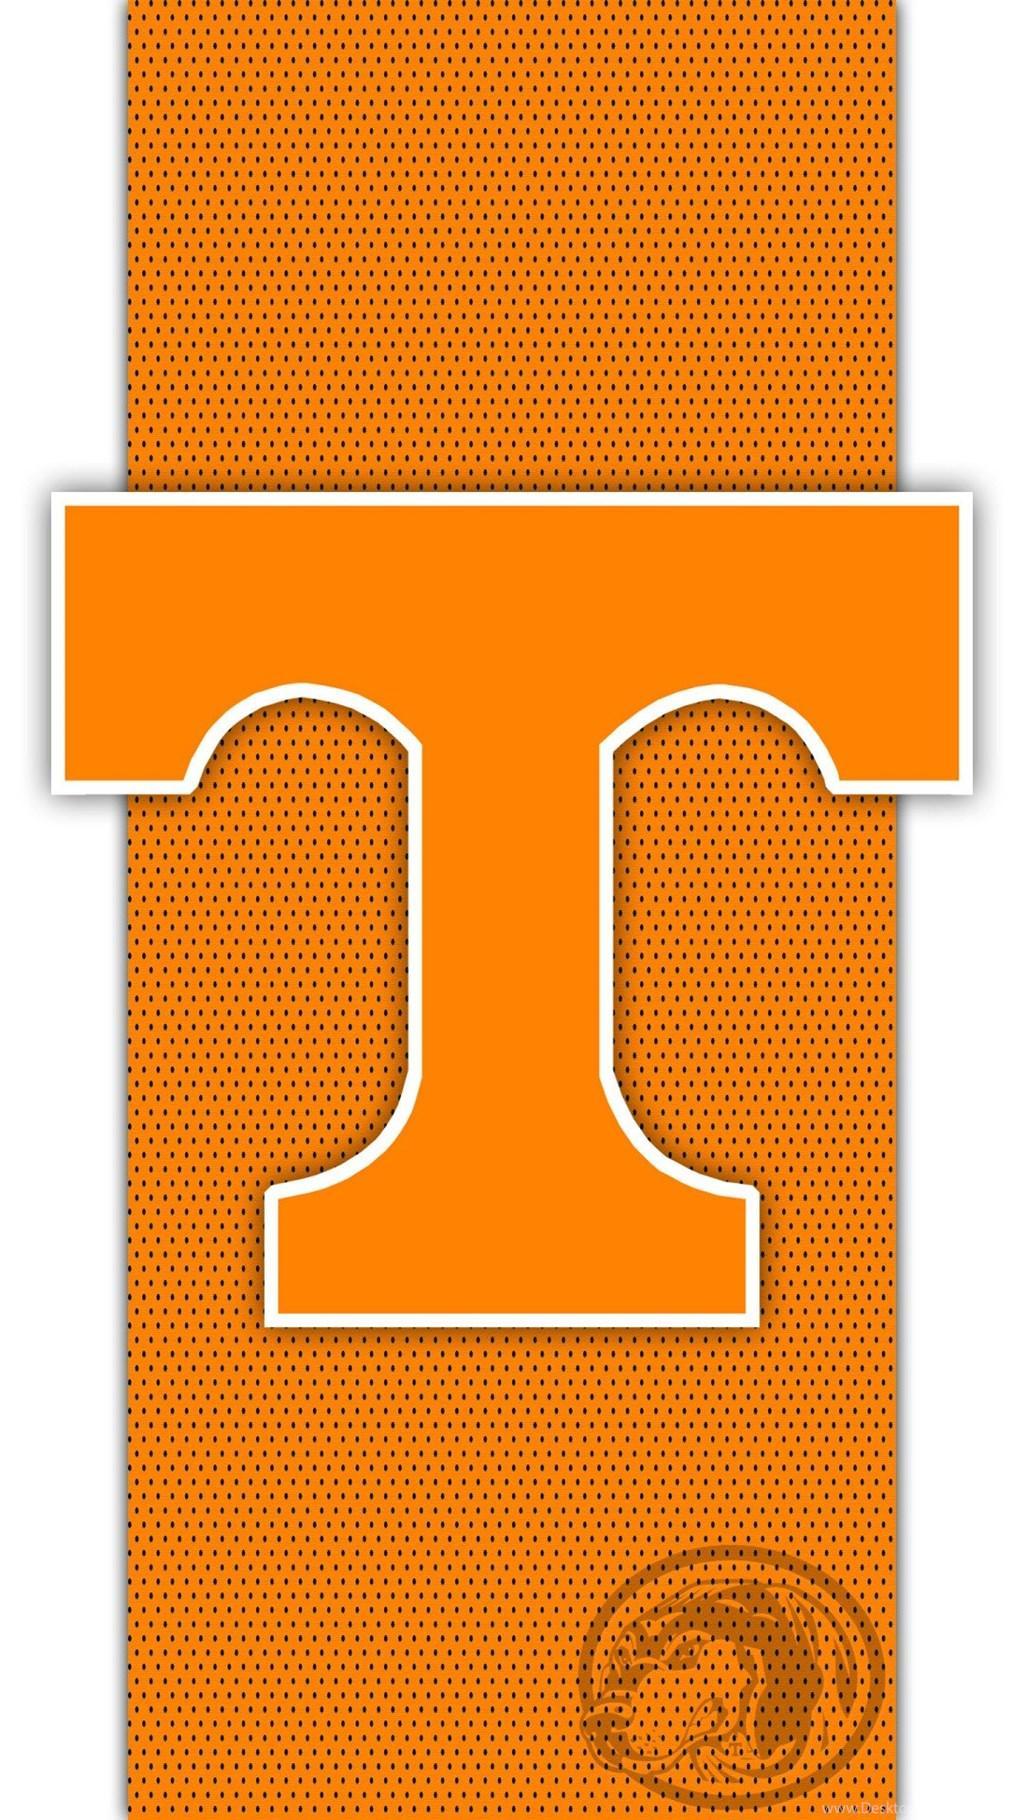 Tennessee Vols Wallpaper Group , Download for free